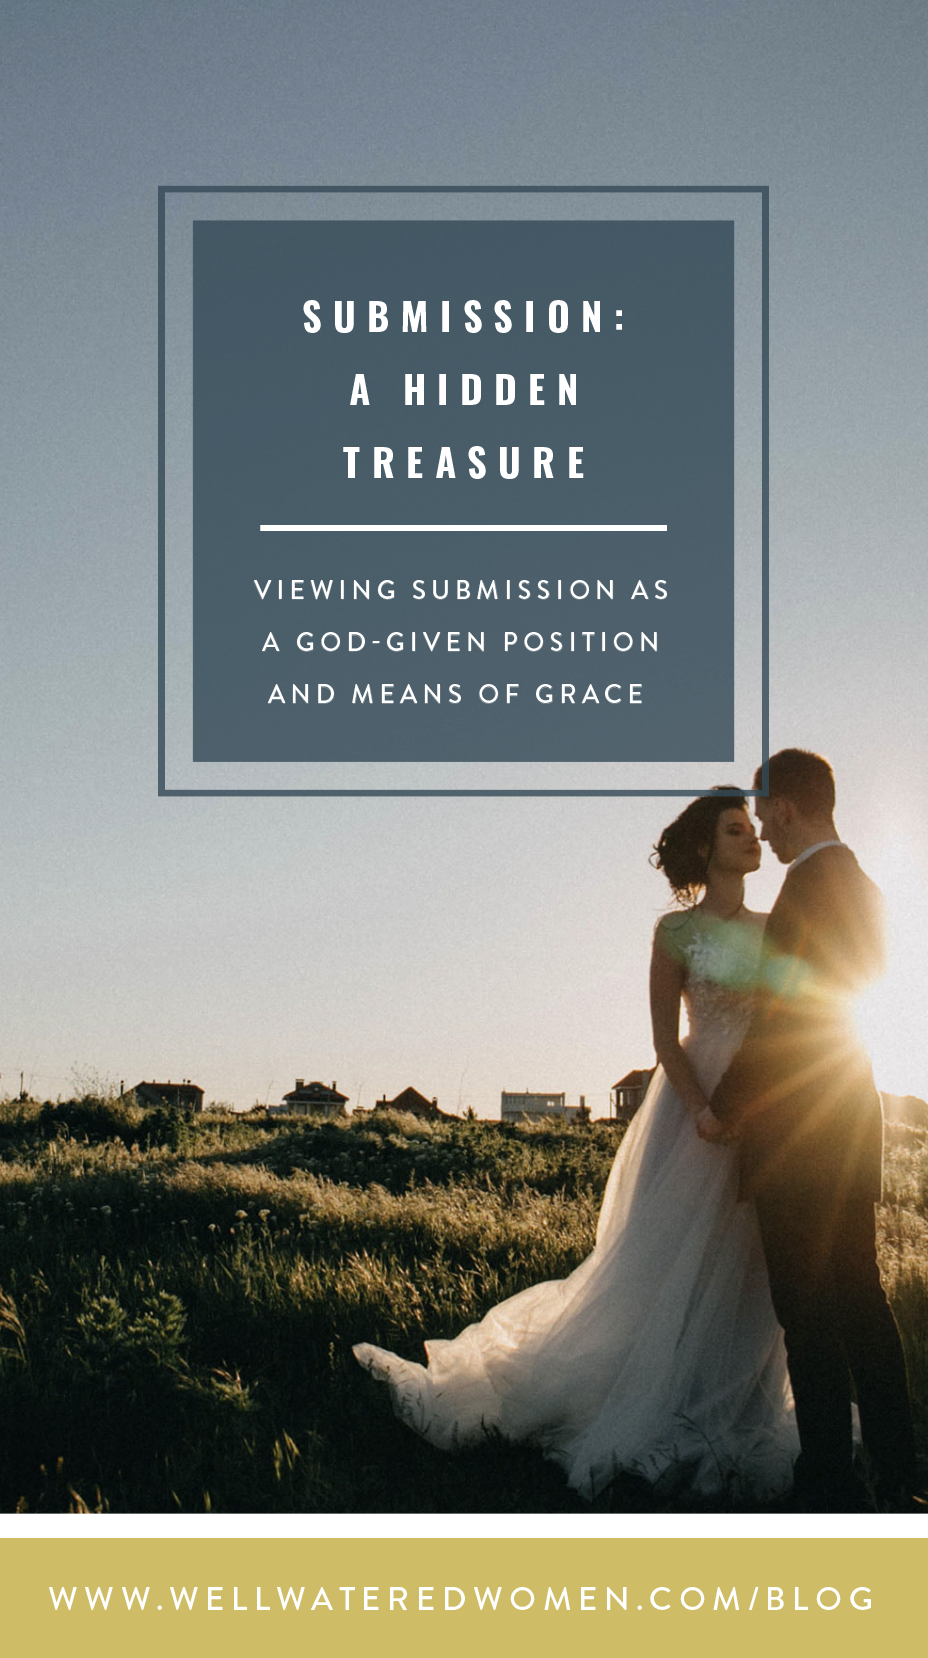 Marriage and submission as a spiritual practice, not a negative word.